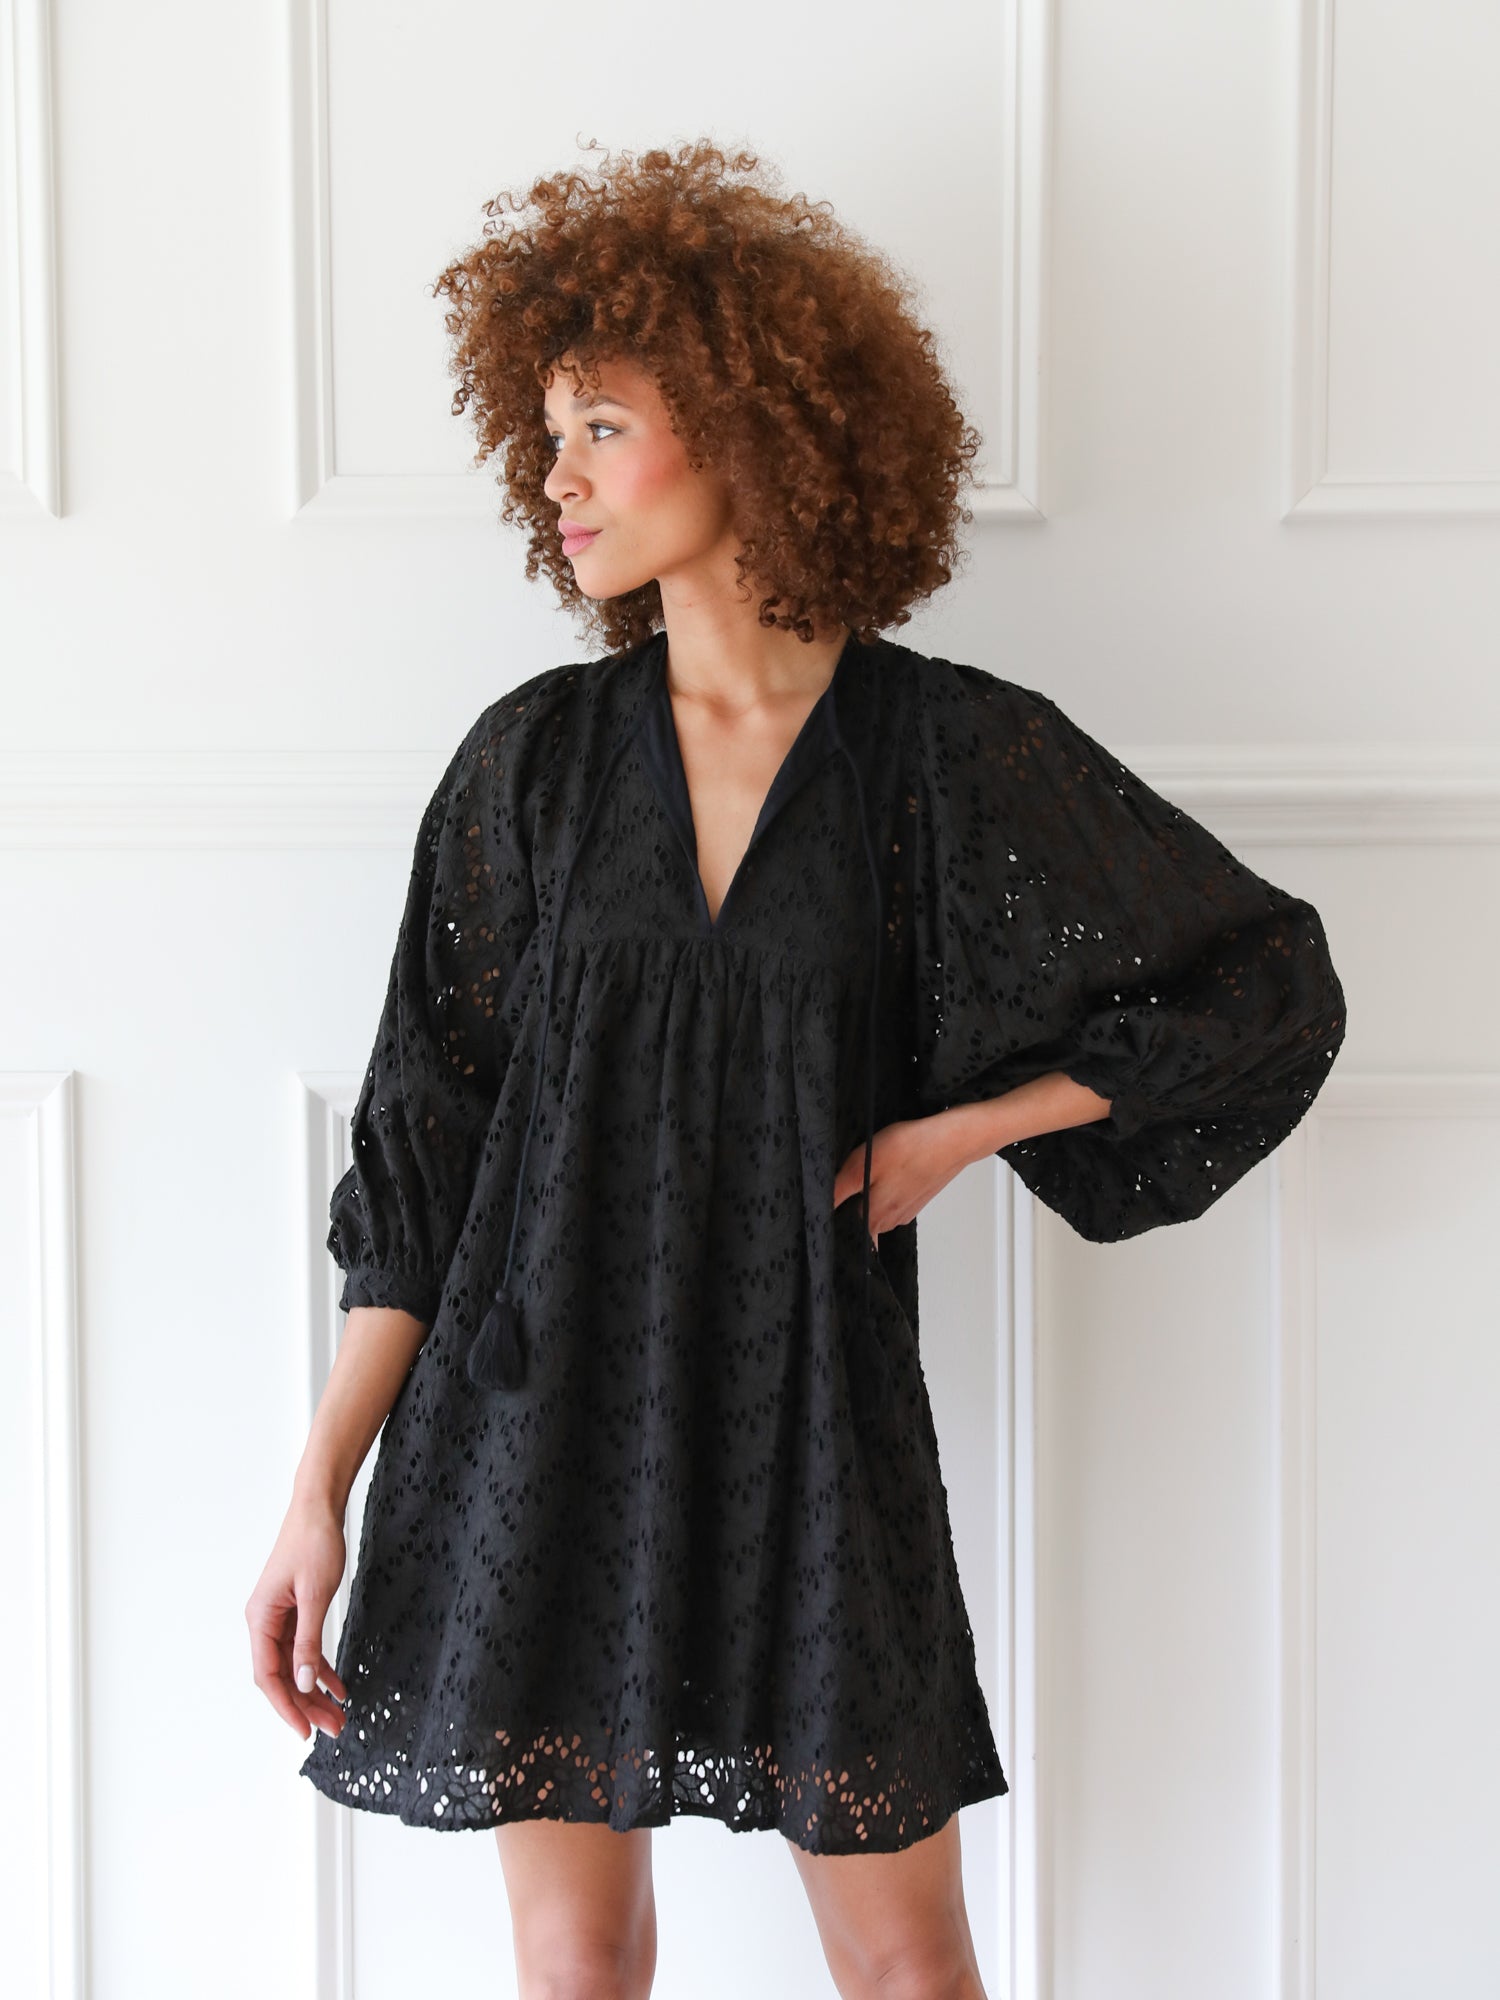 MILLE Clothing Daisy Dress in Black Floral Eyelet